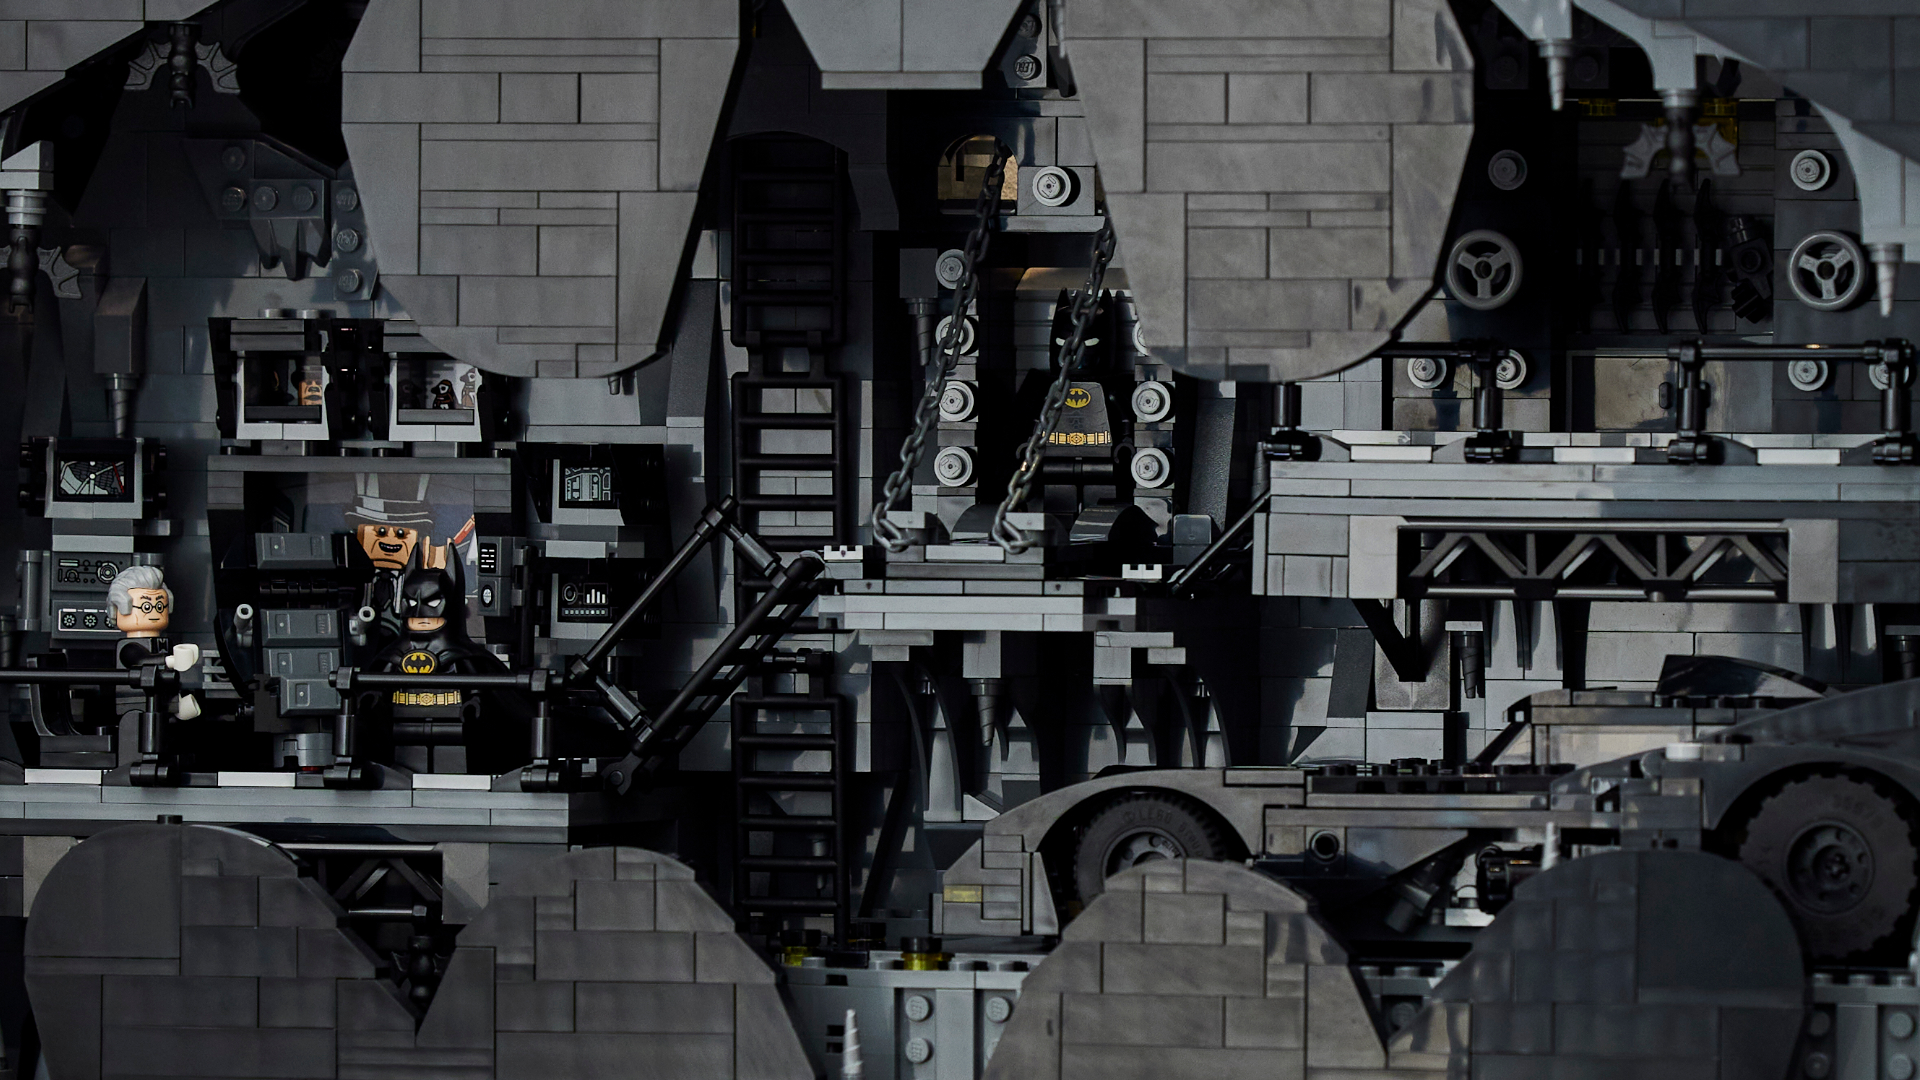 Lego announce new Batcave set from the Batman Returns movie